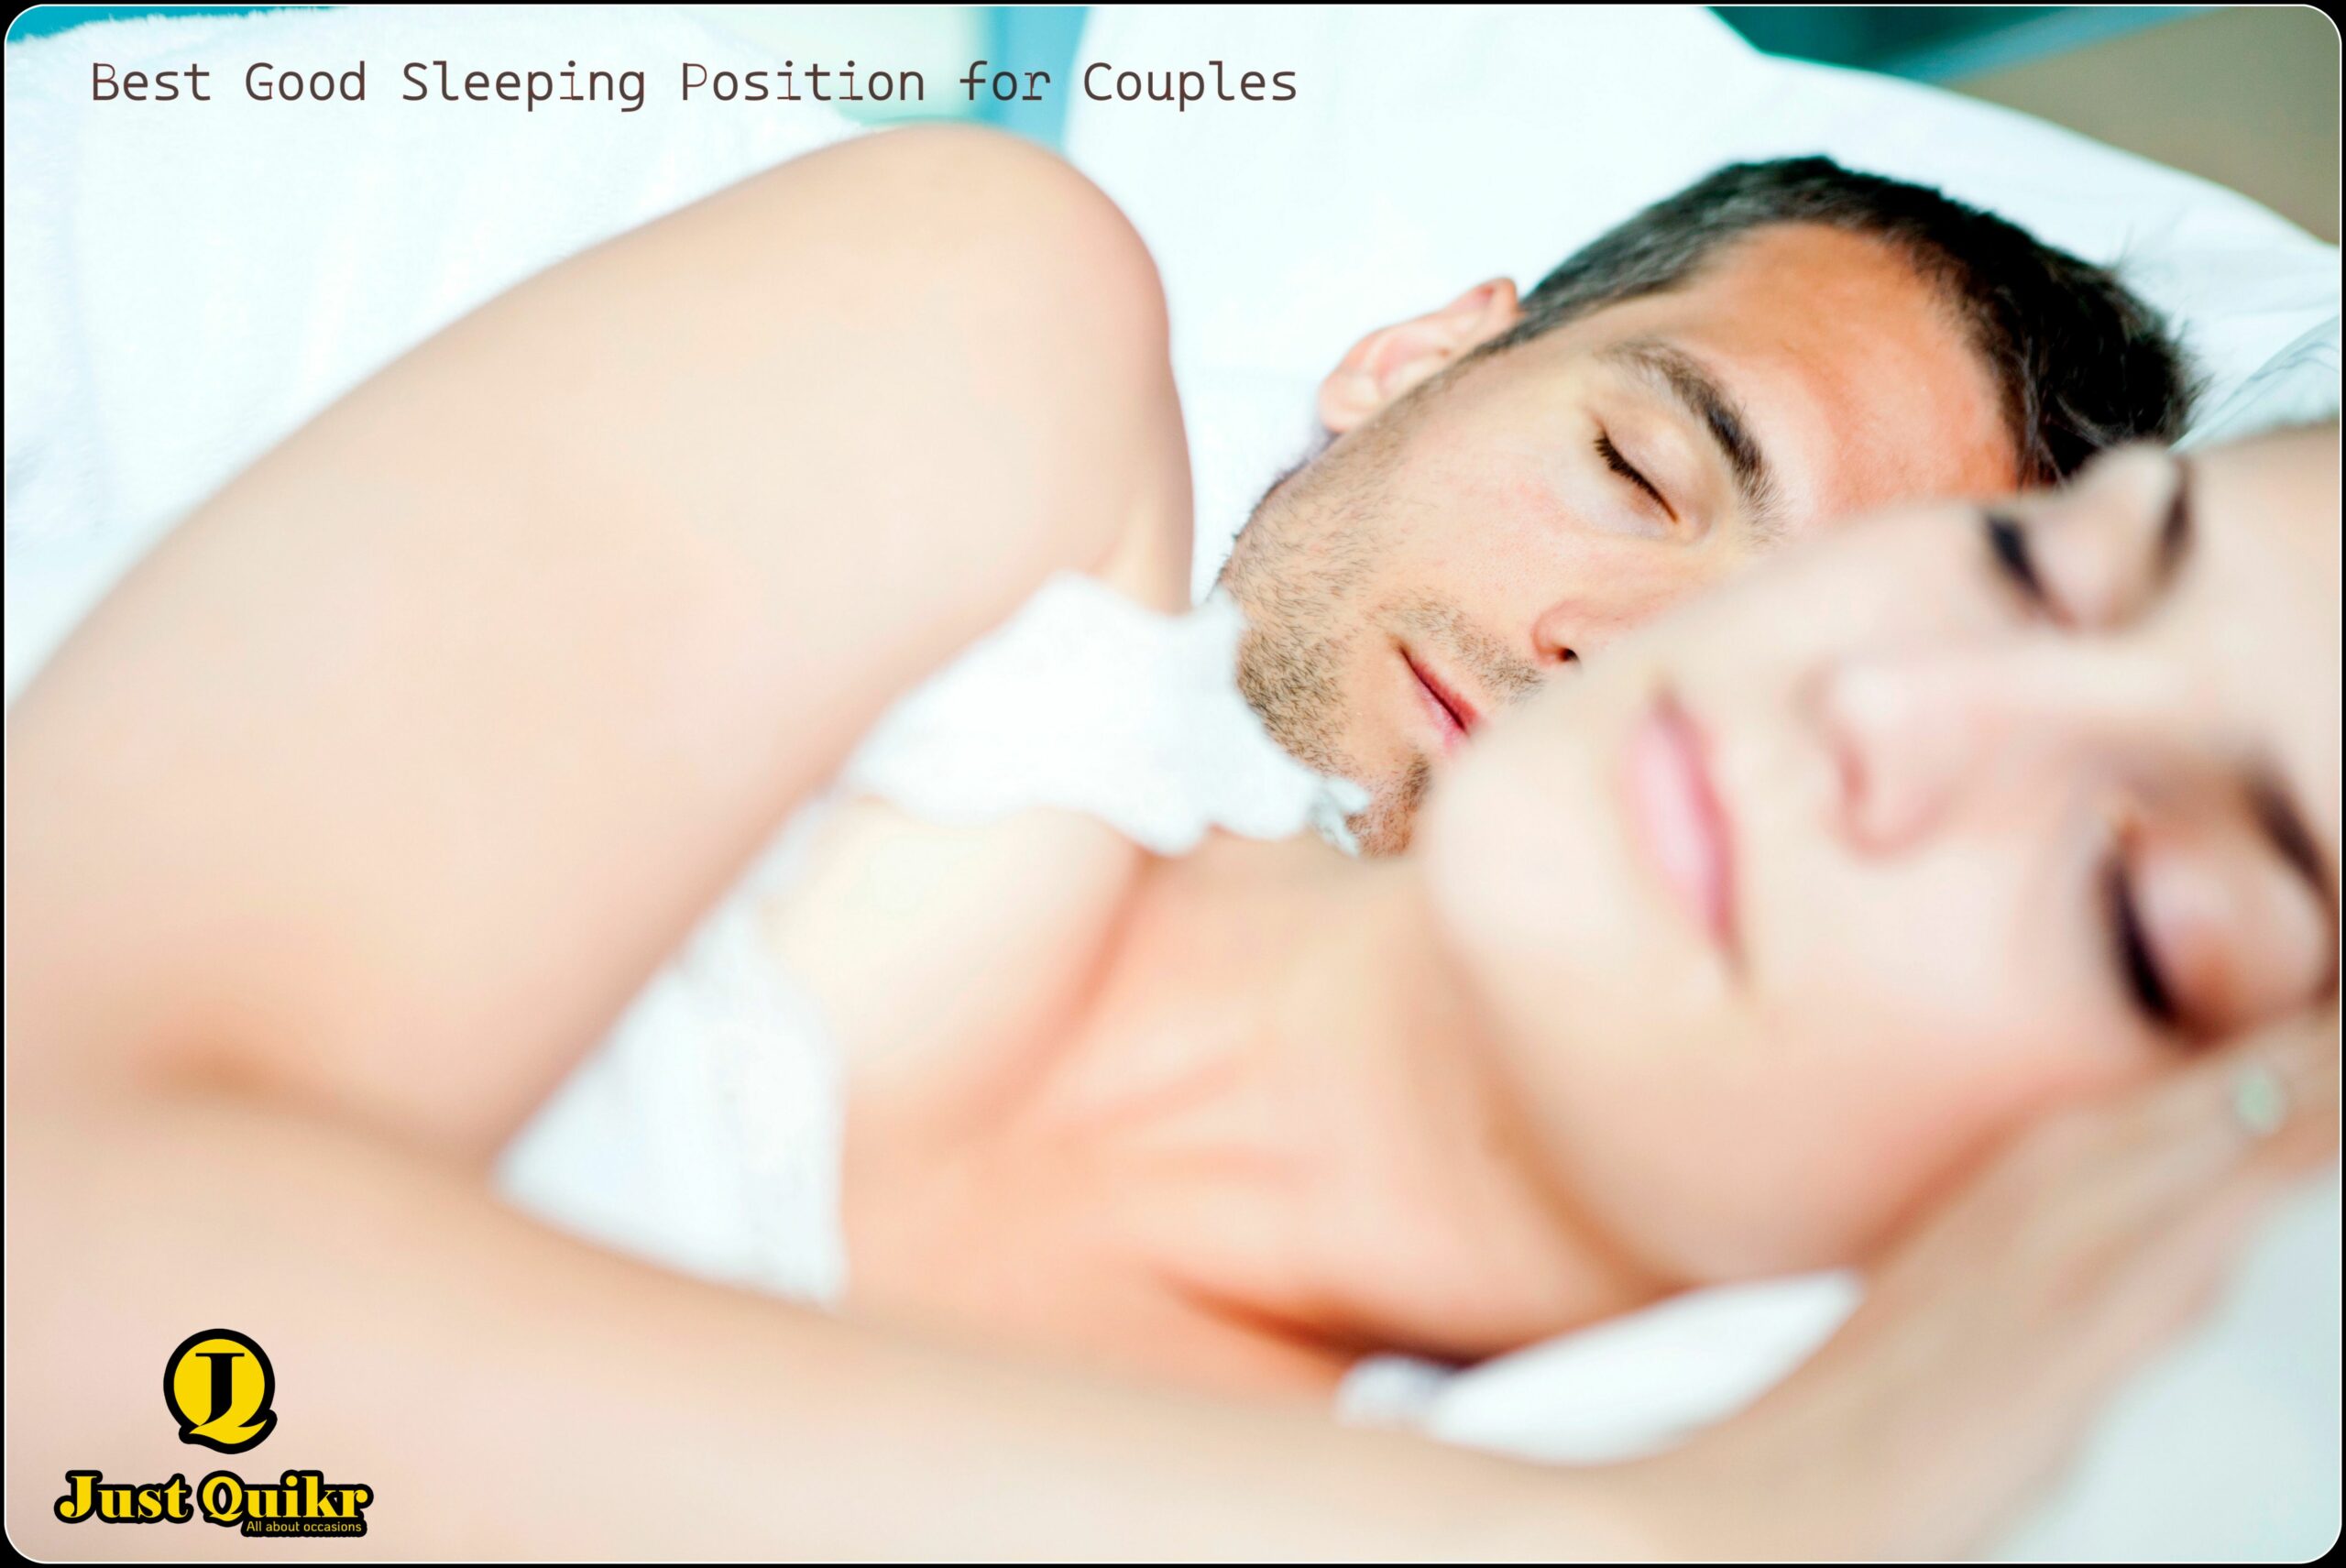 Best Good Sleeping Position for Couples